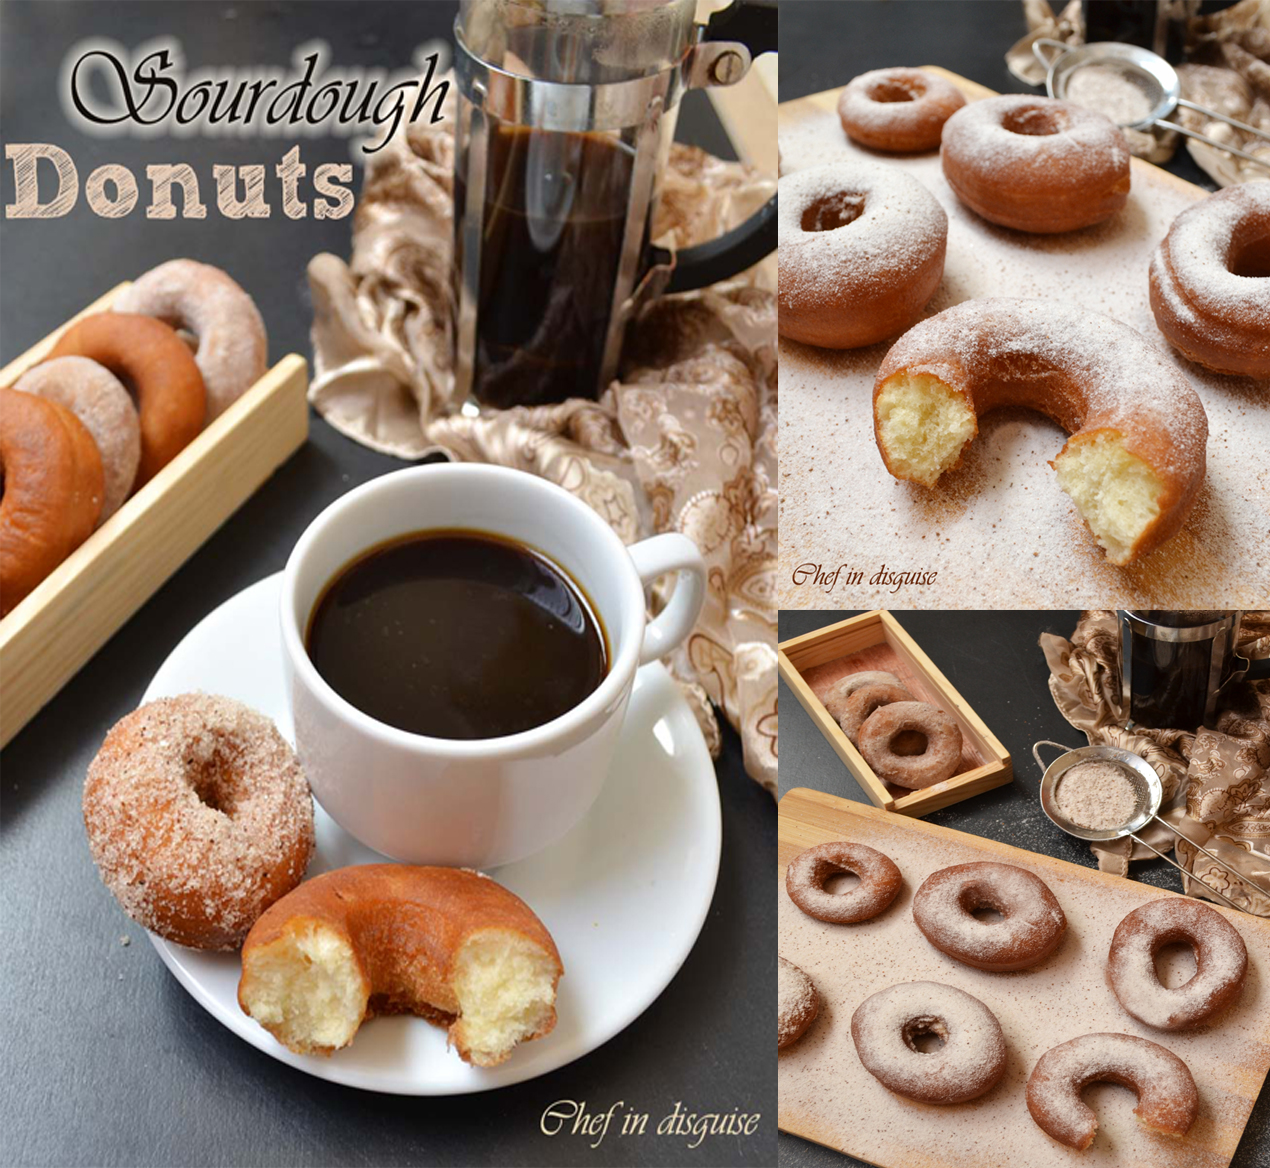 Sourdough donuts: Chef in disguise